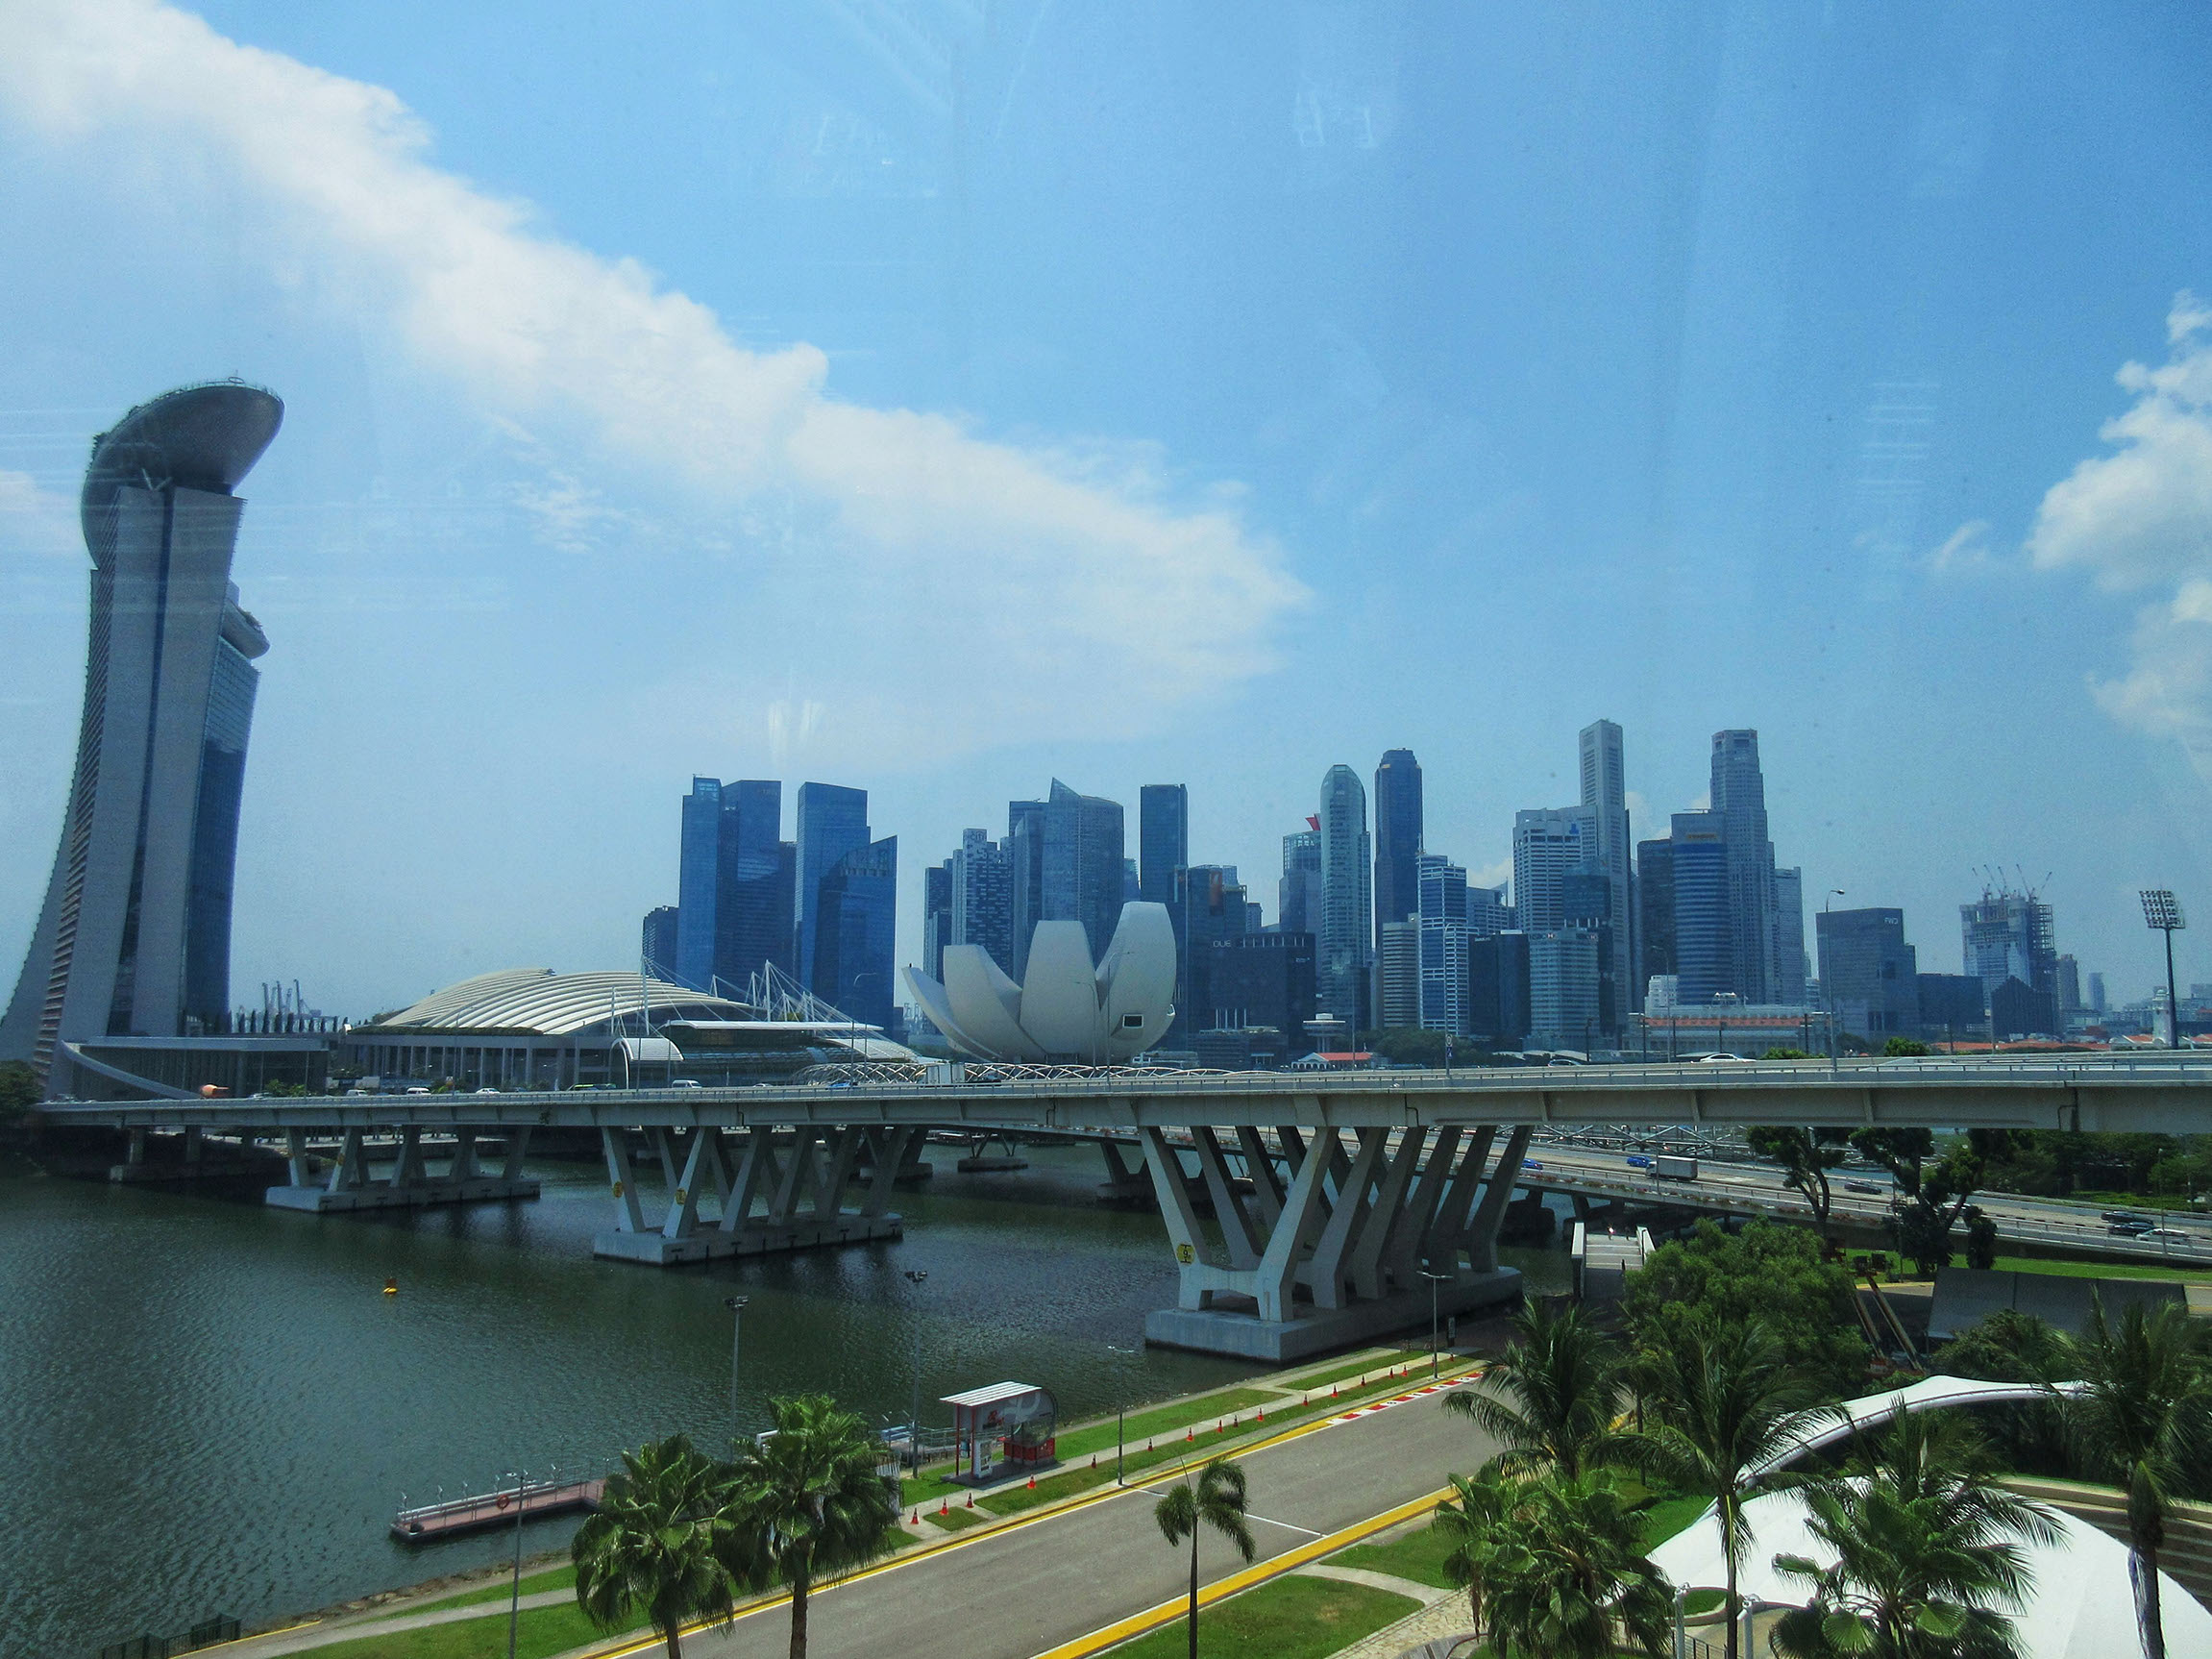 View from the Singapore Flyer of the Singapore skyline & Skyscrapers